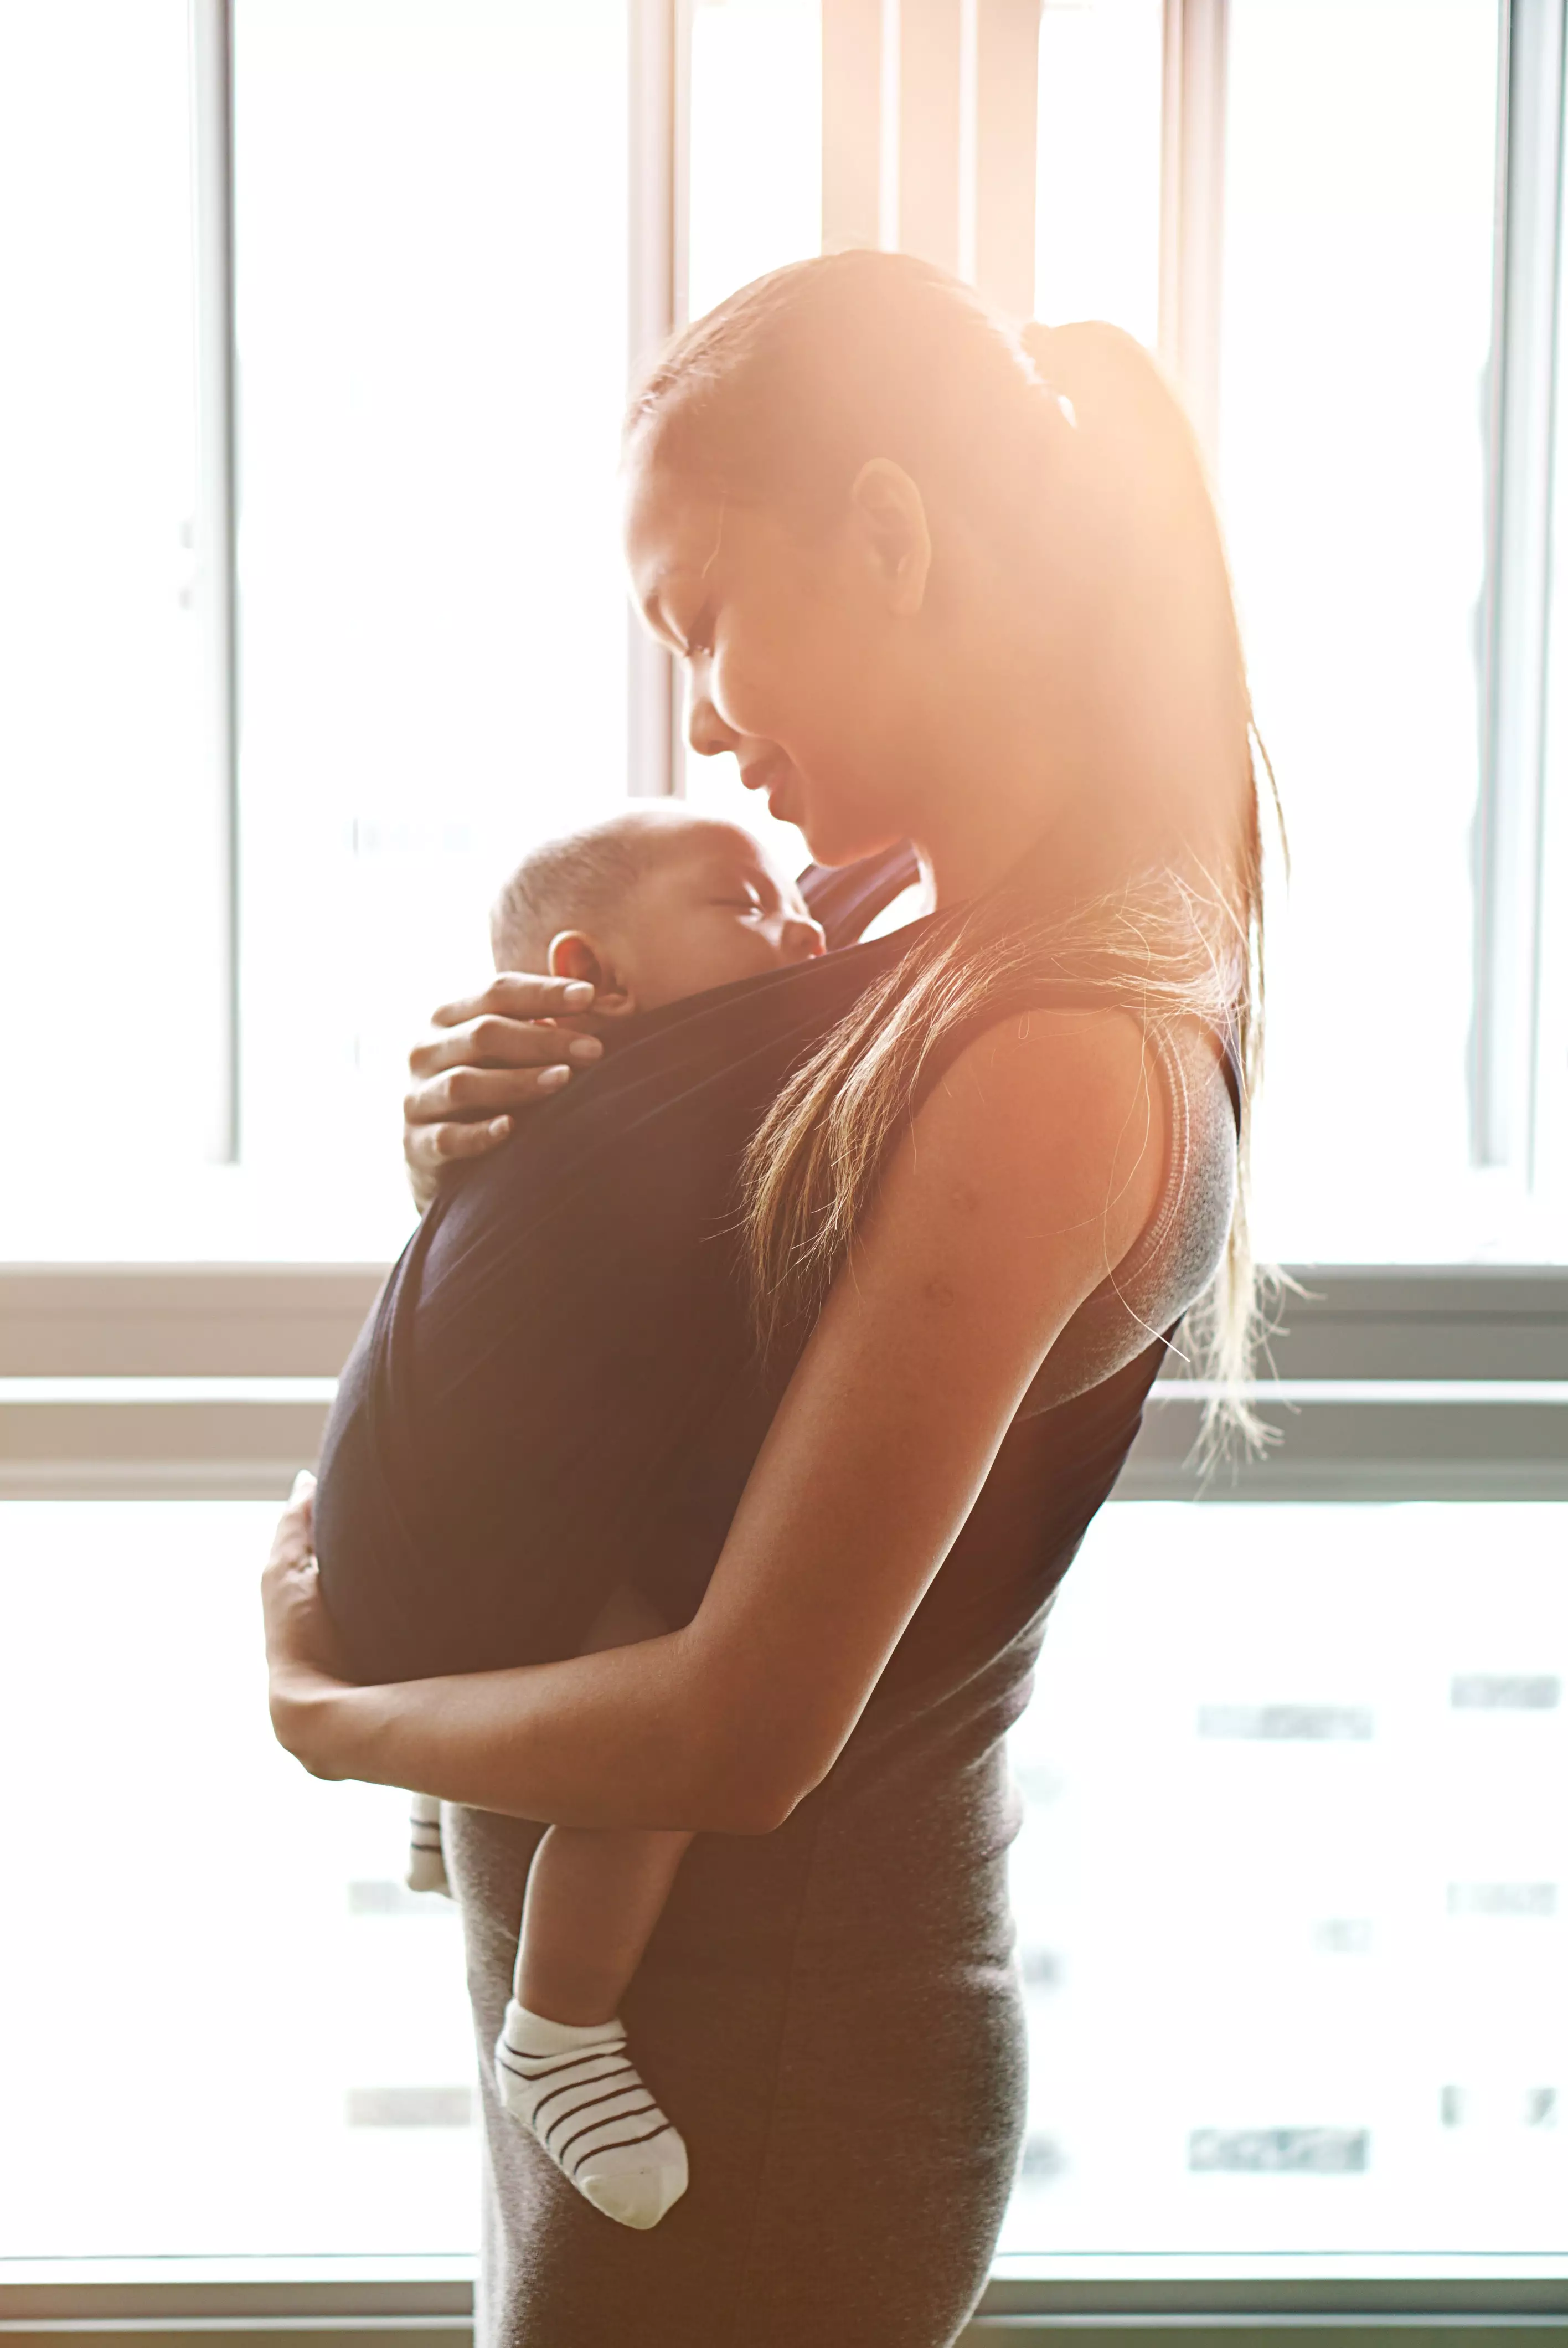 Woman with baby - Unsplash